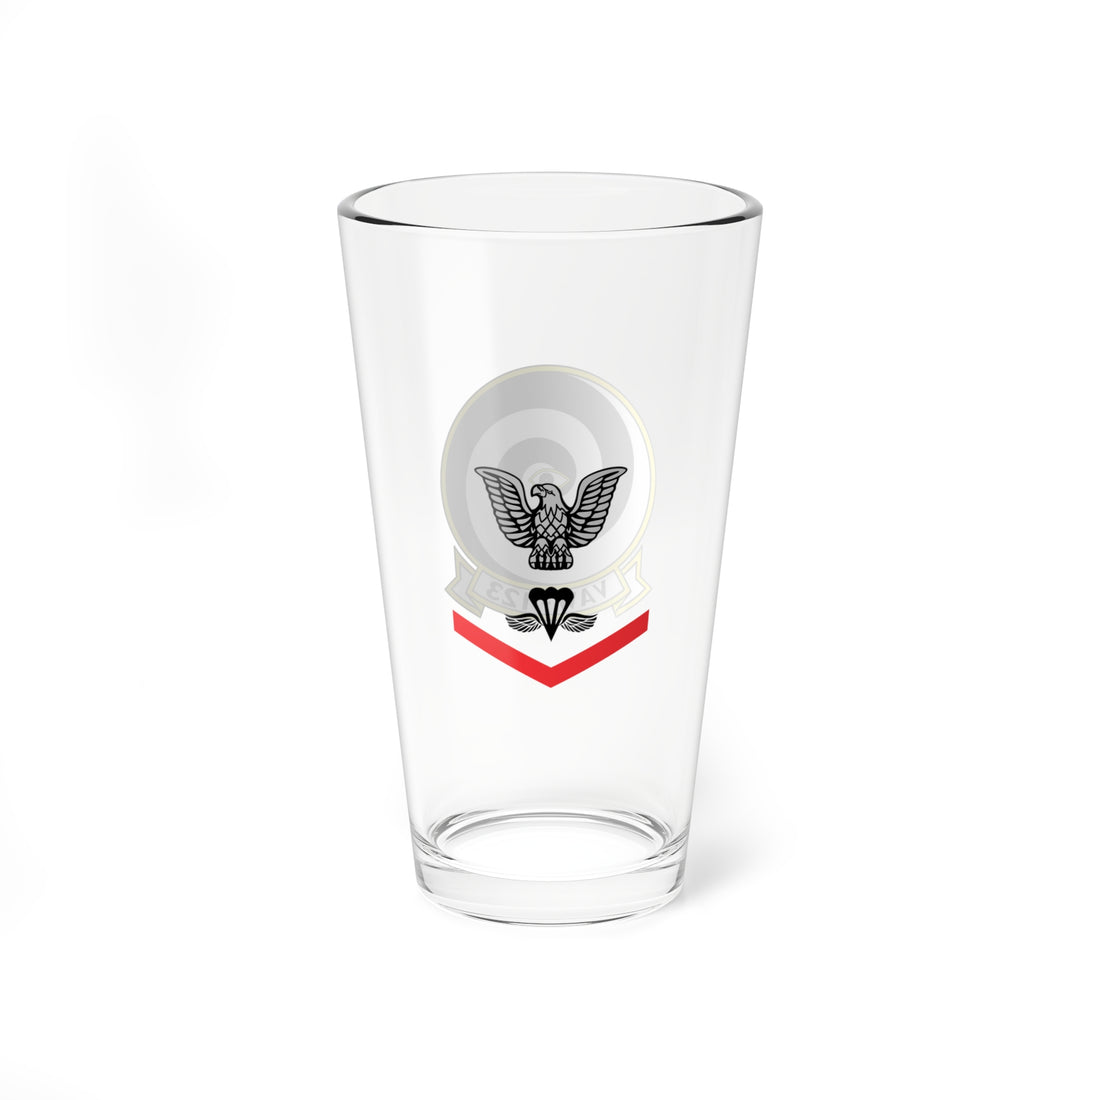 VAW-123 "Screwtops" PR3, Personalized Rating Pint Glass for a Retirement Gift